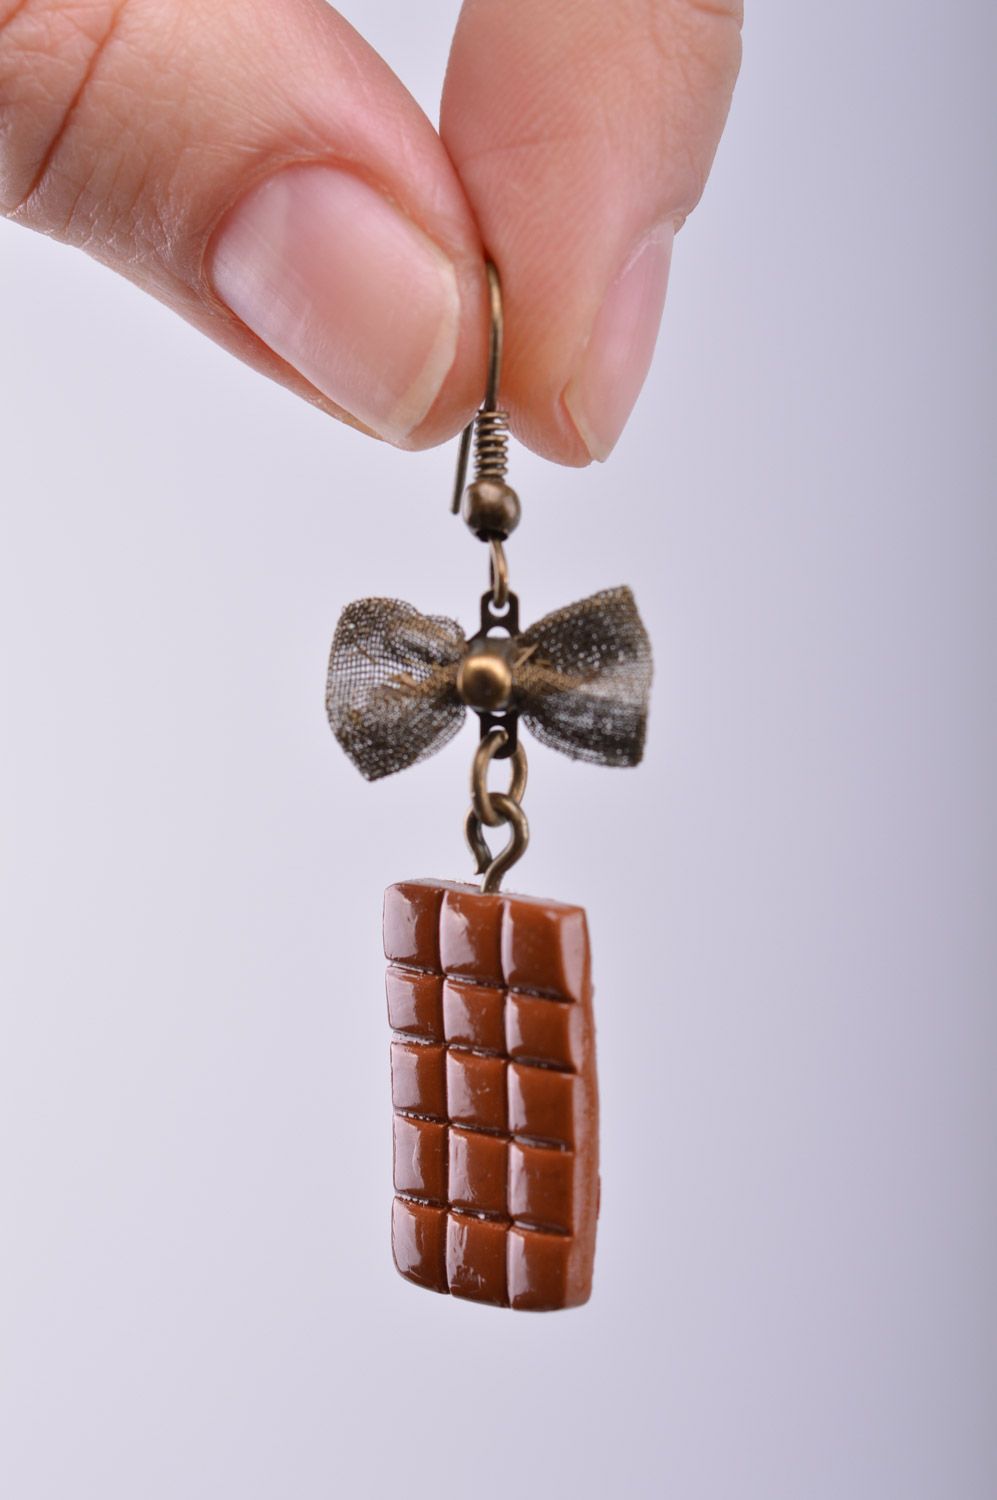 Homemade plastic earrings with charms in the shape of chocolate bars photo 2